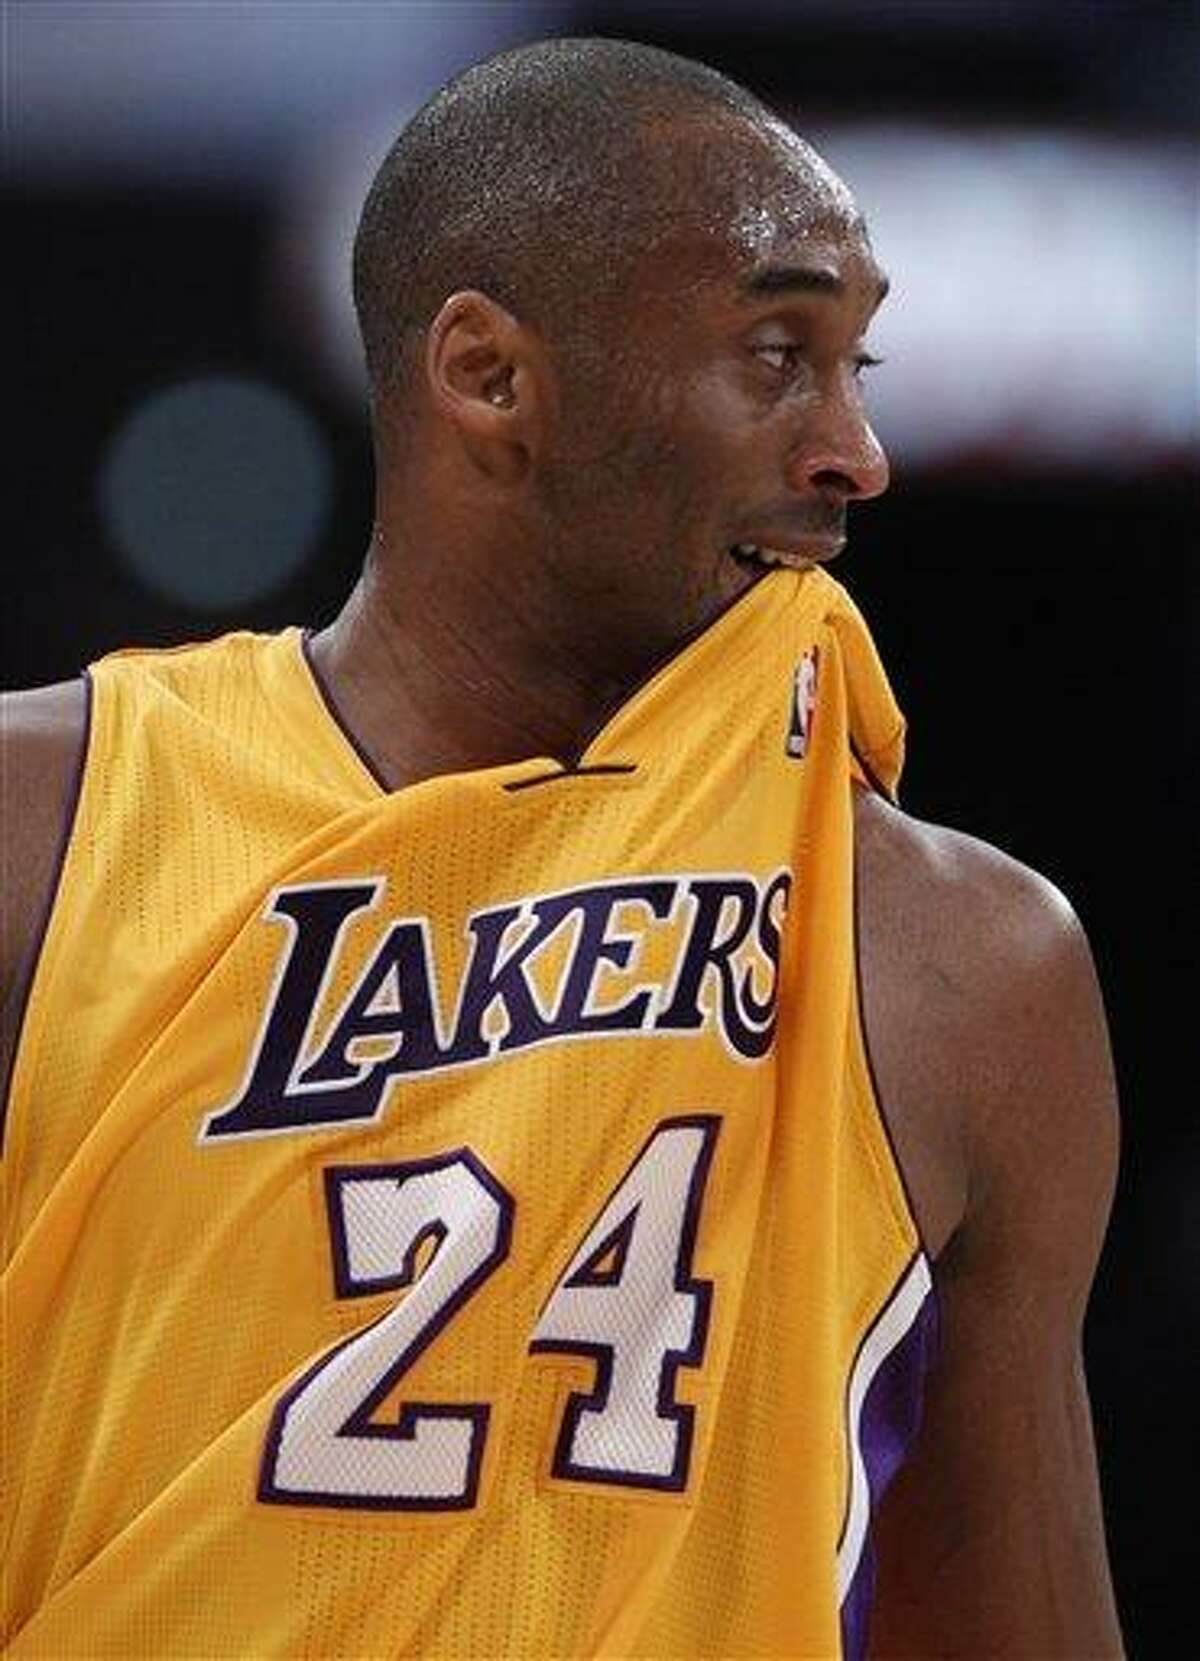 Kobe Bryant third in NBA jersey sales; Lakers fourth in